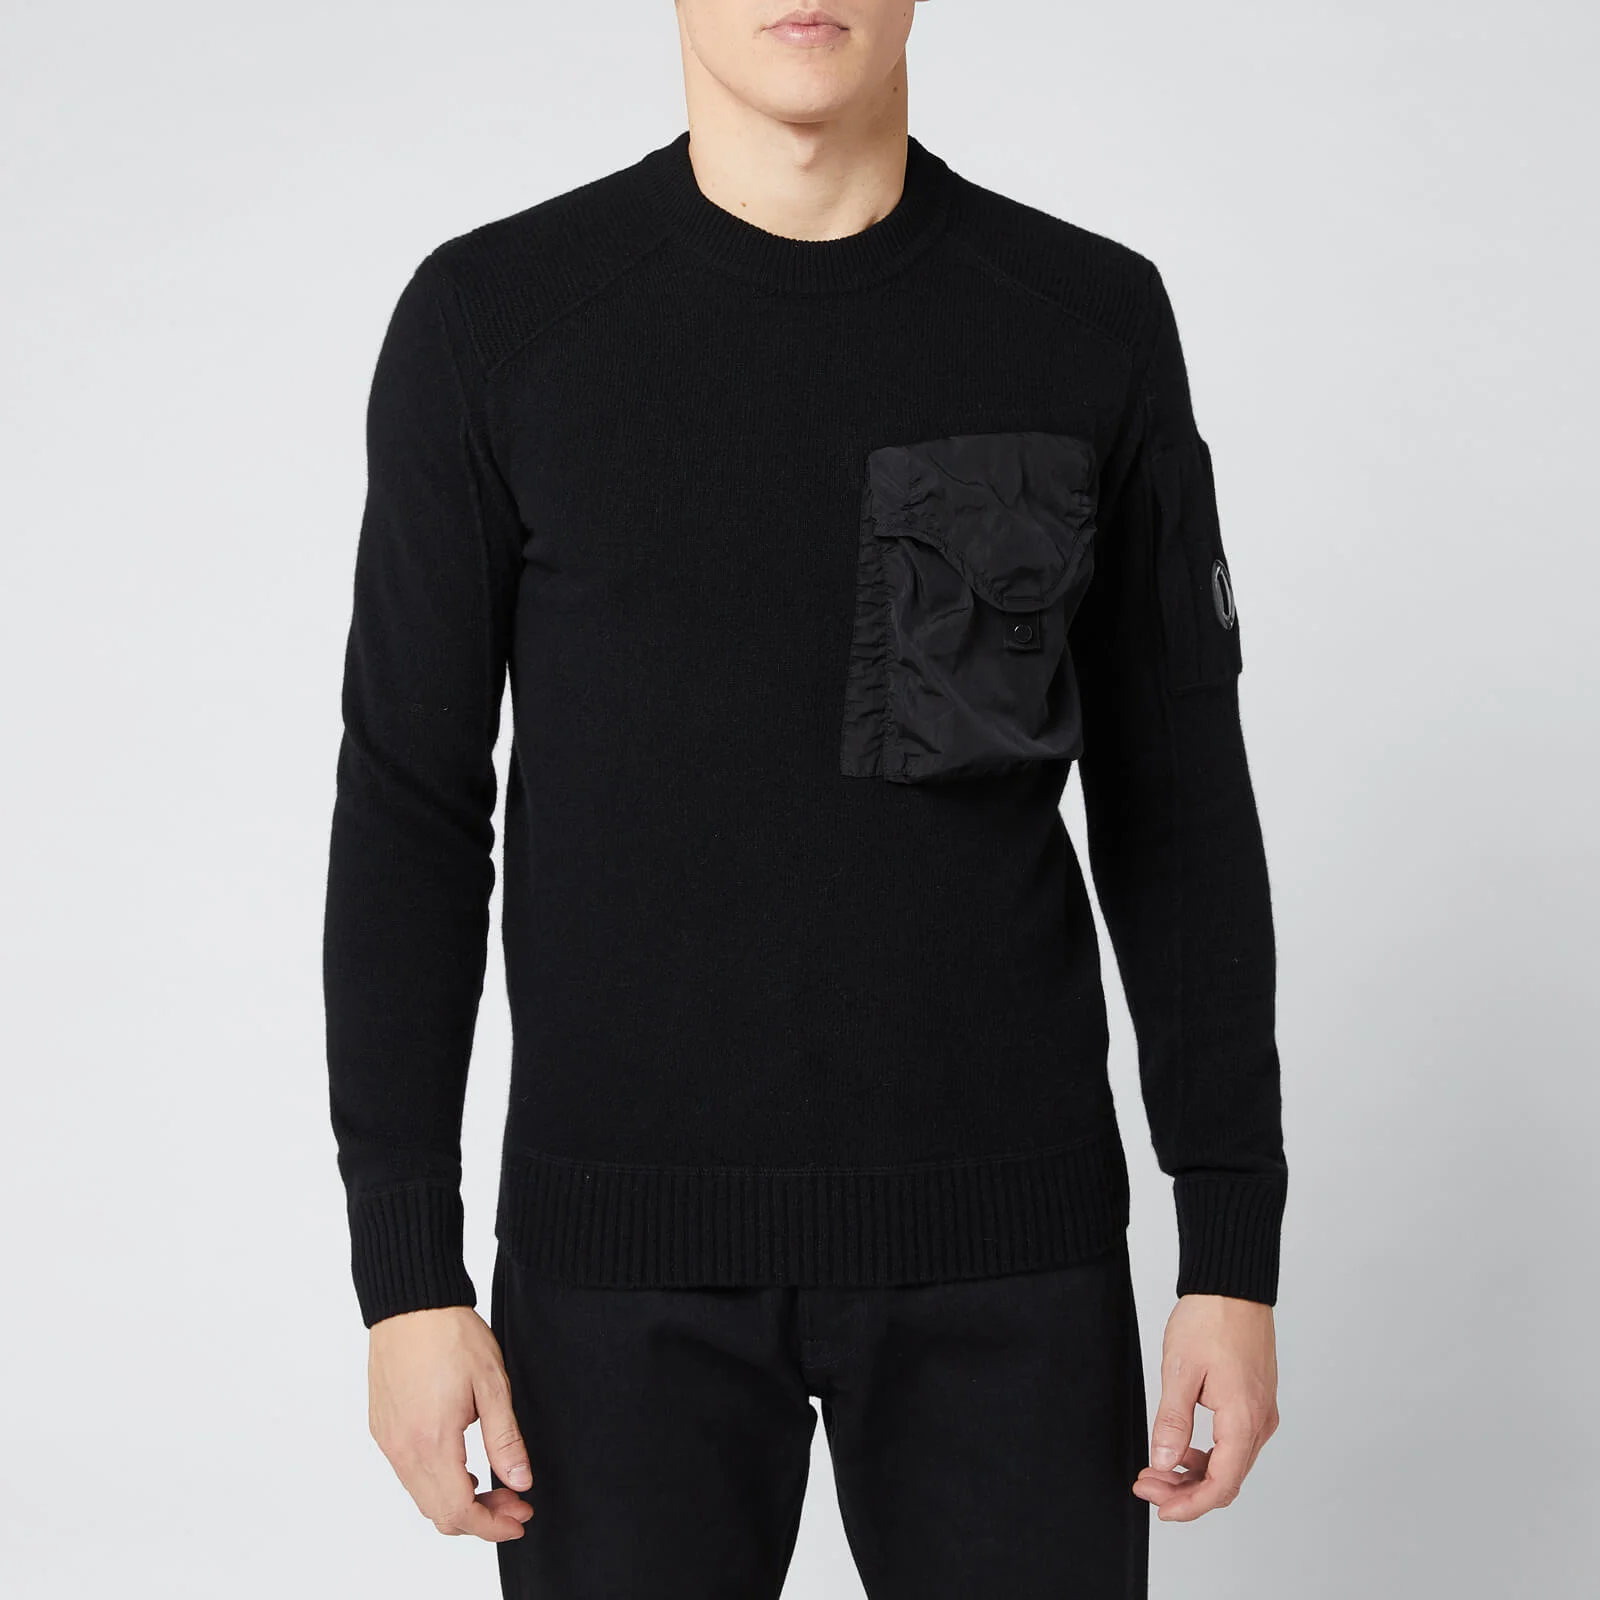 C.P. Company Men's Crew Knitted Jumper - Black Image 1